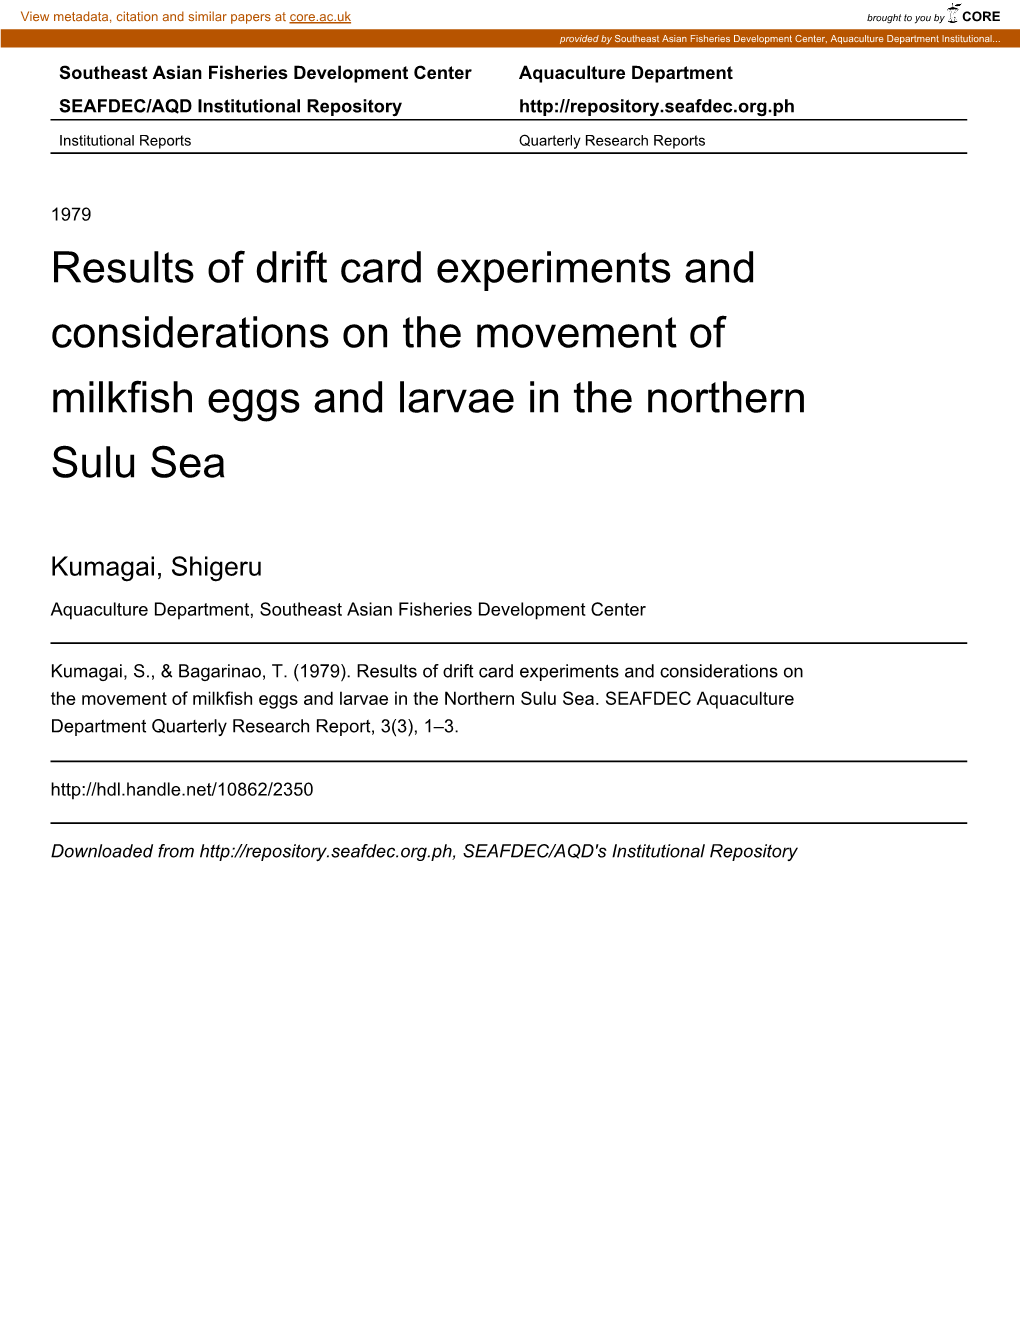 Results of Drift Card Experiments and Considerations on the Movement of Milkfish Eggs and Larvae in the Northern Sulu Sea